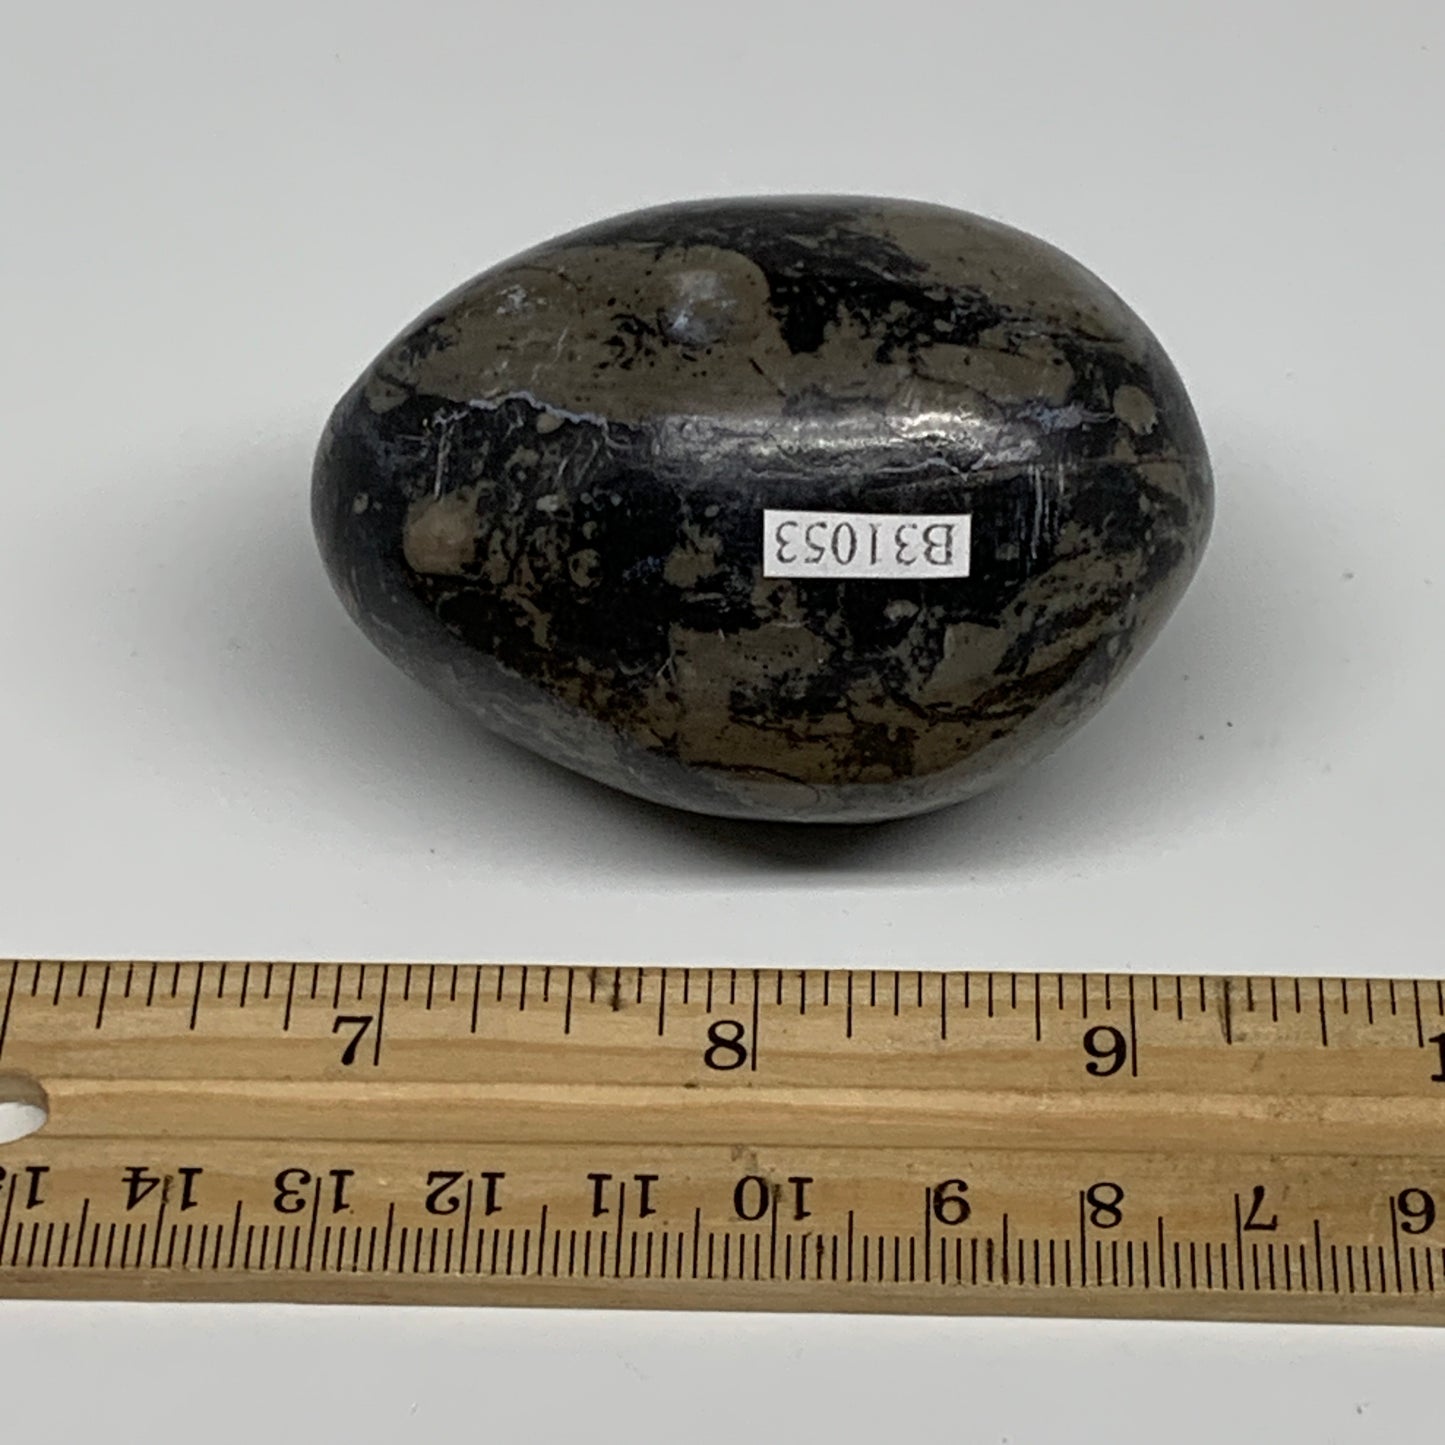 167.1g, 2.4"x1.7", Natural Fossil Orthoceras Stone Egg from Morocco, B31053